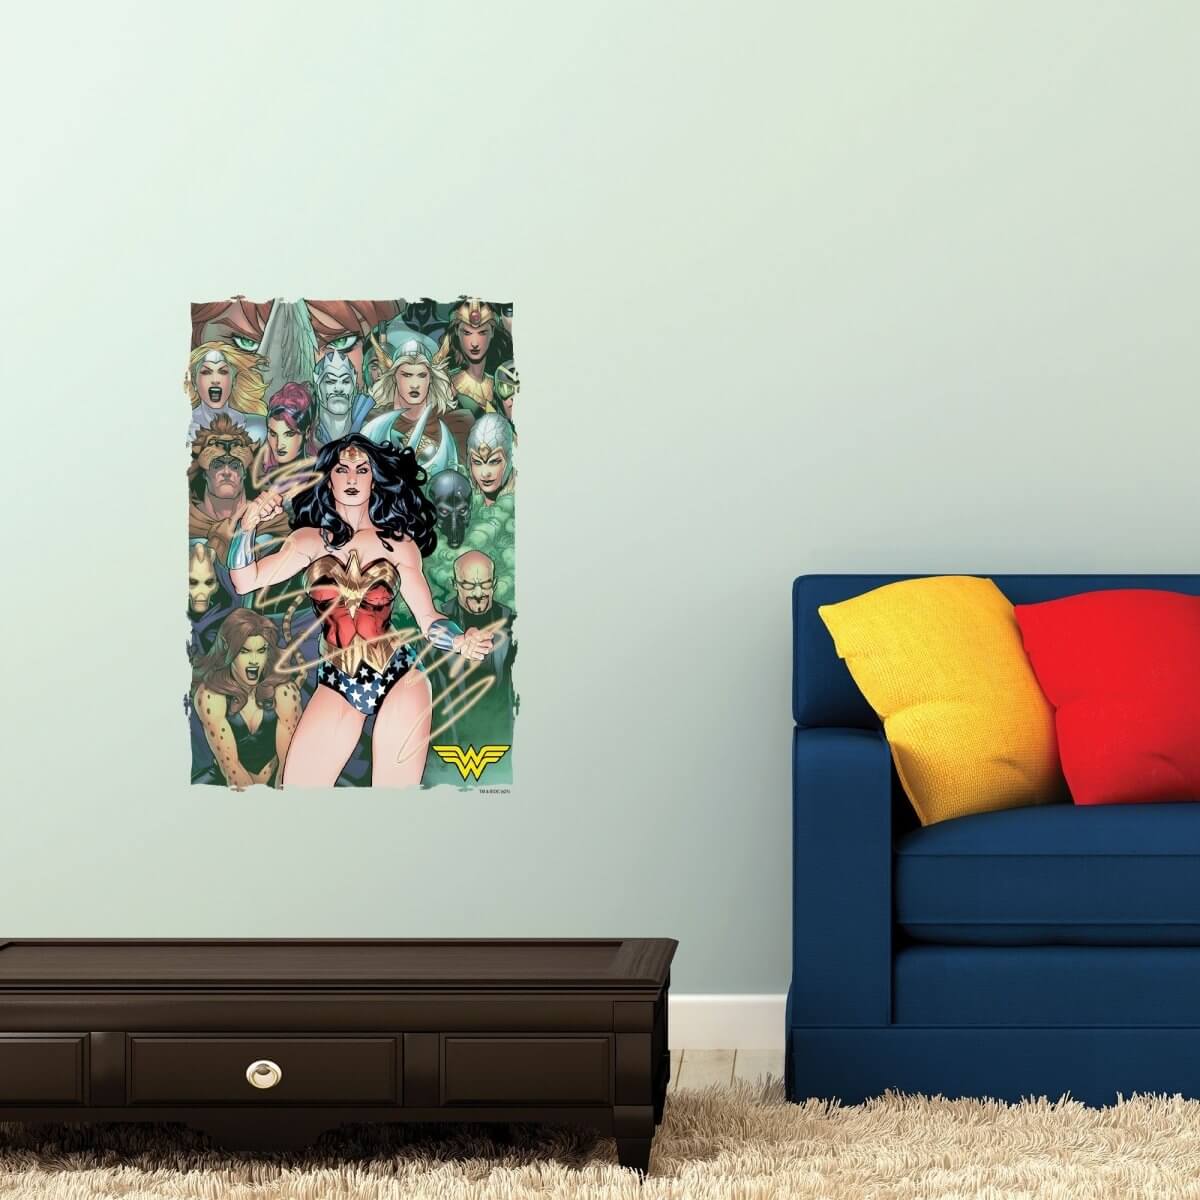 Kismet Decals Wonder Woman Annual #1 Vol 3 Comic Cover Series Officially Licensed Wall Sticker - Easy DIY DC Comics Home, Kids or Adult Bedroom, Office, Living Room Decor Wall Art - Kismet Decals